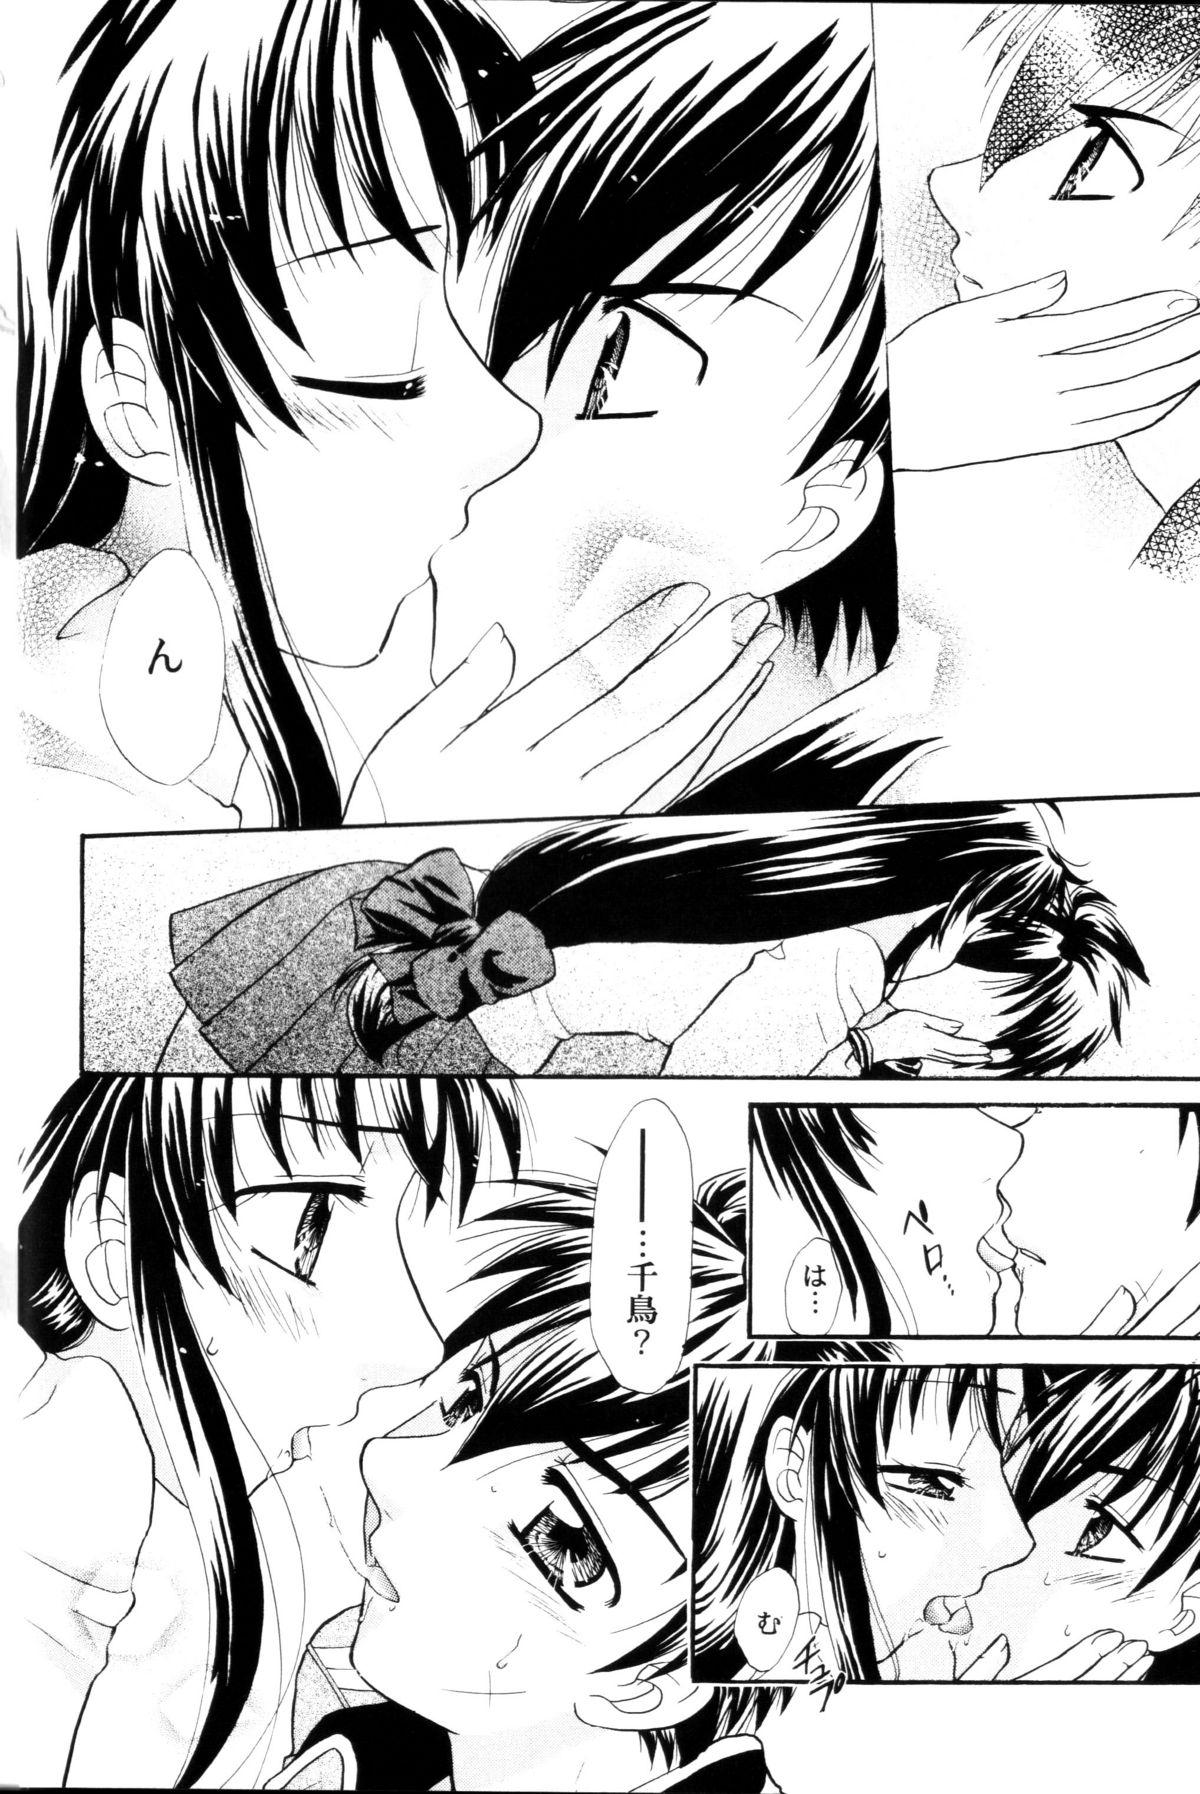 Bisex A.I. - Full metal panic Abuse - Page 9